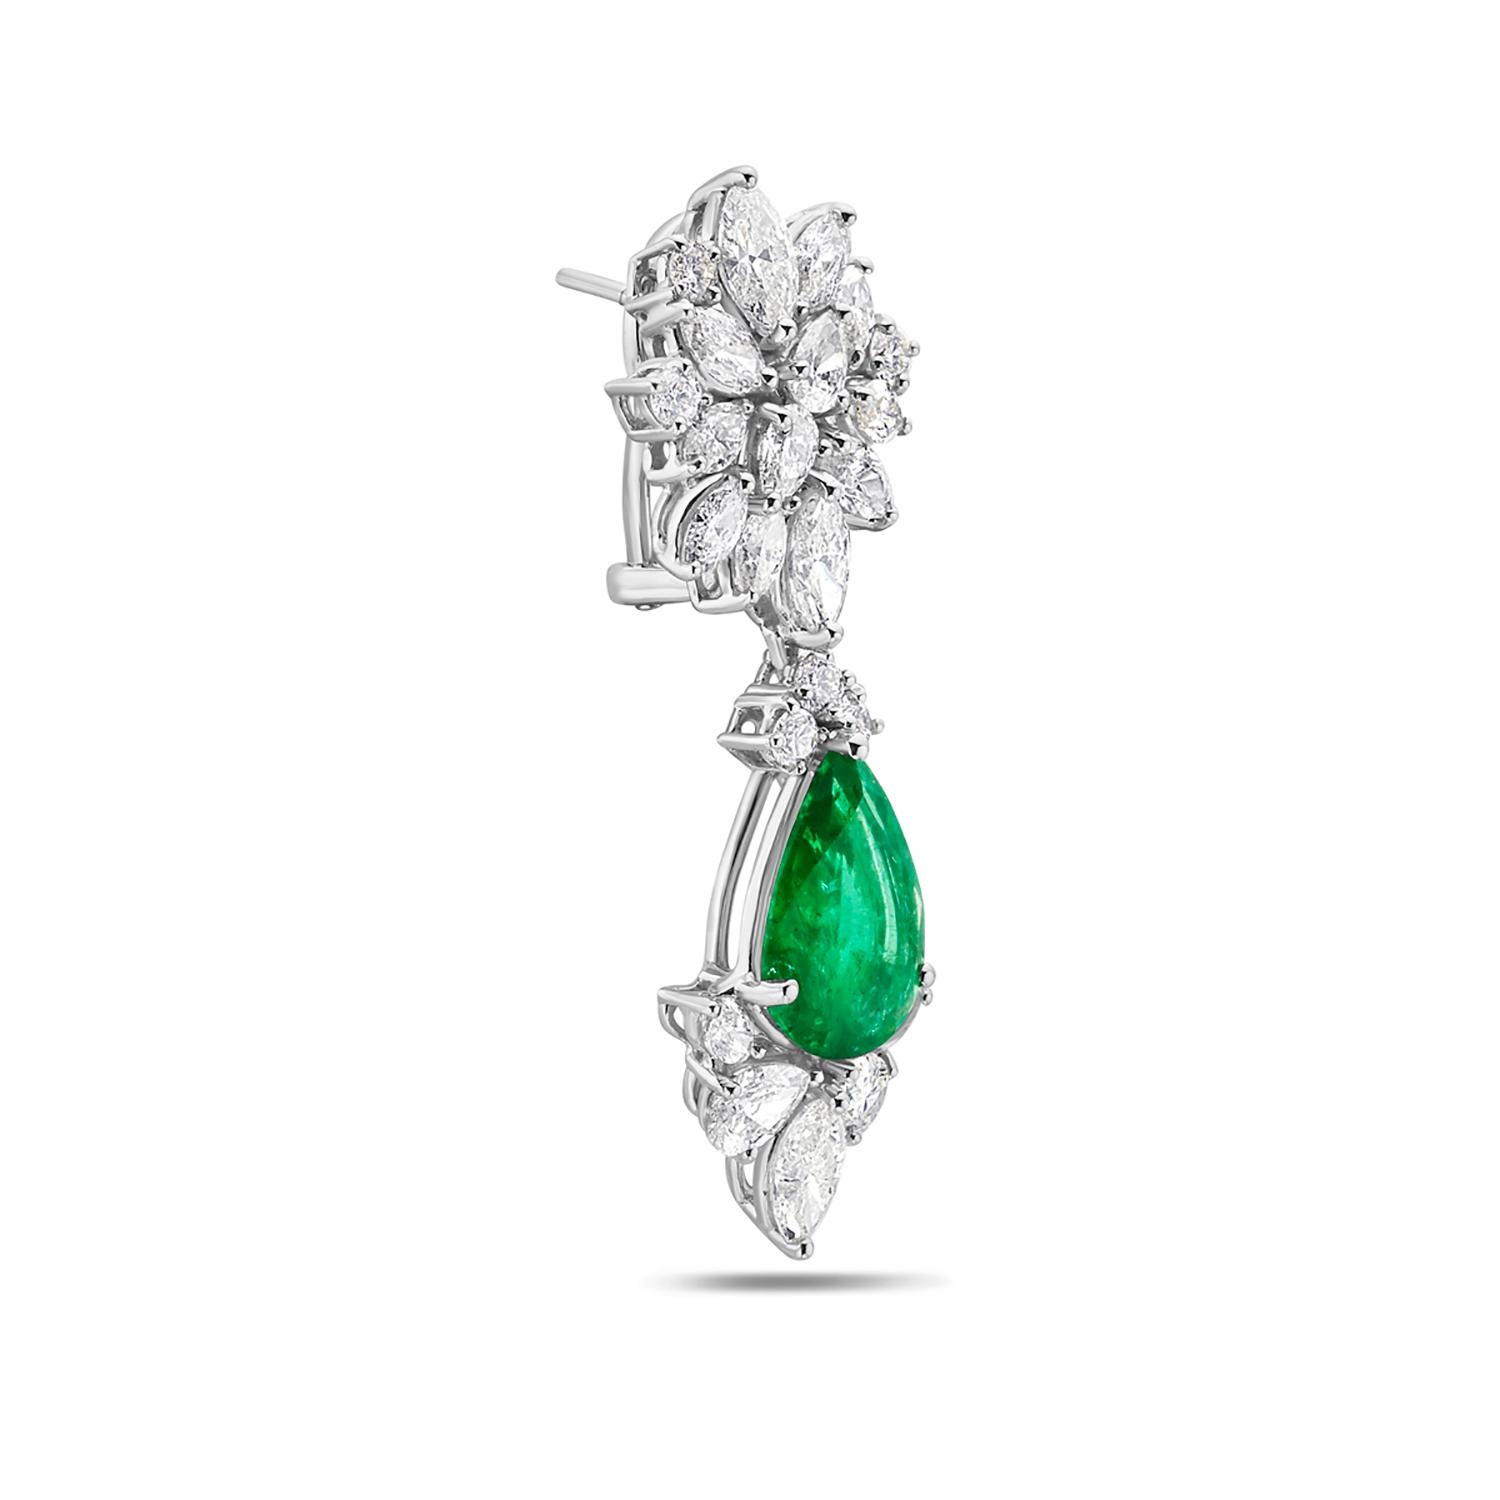 Contemporary Starburst Earrings With Zambian Emerald Accented With Diamonds In 18k White Gold For Sale